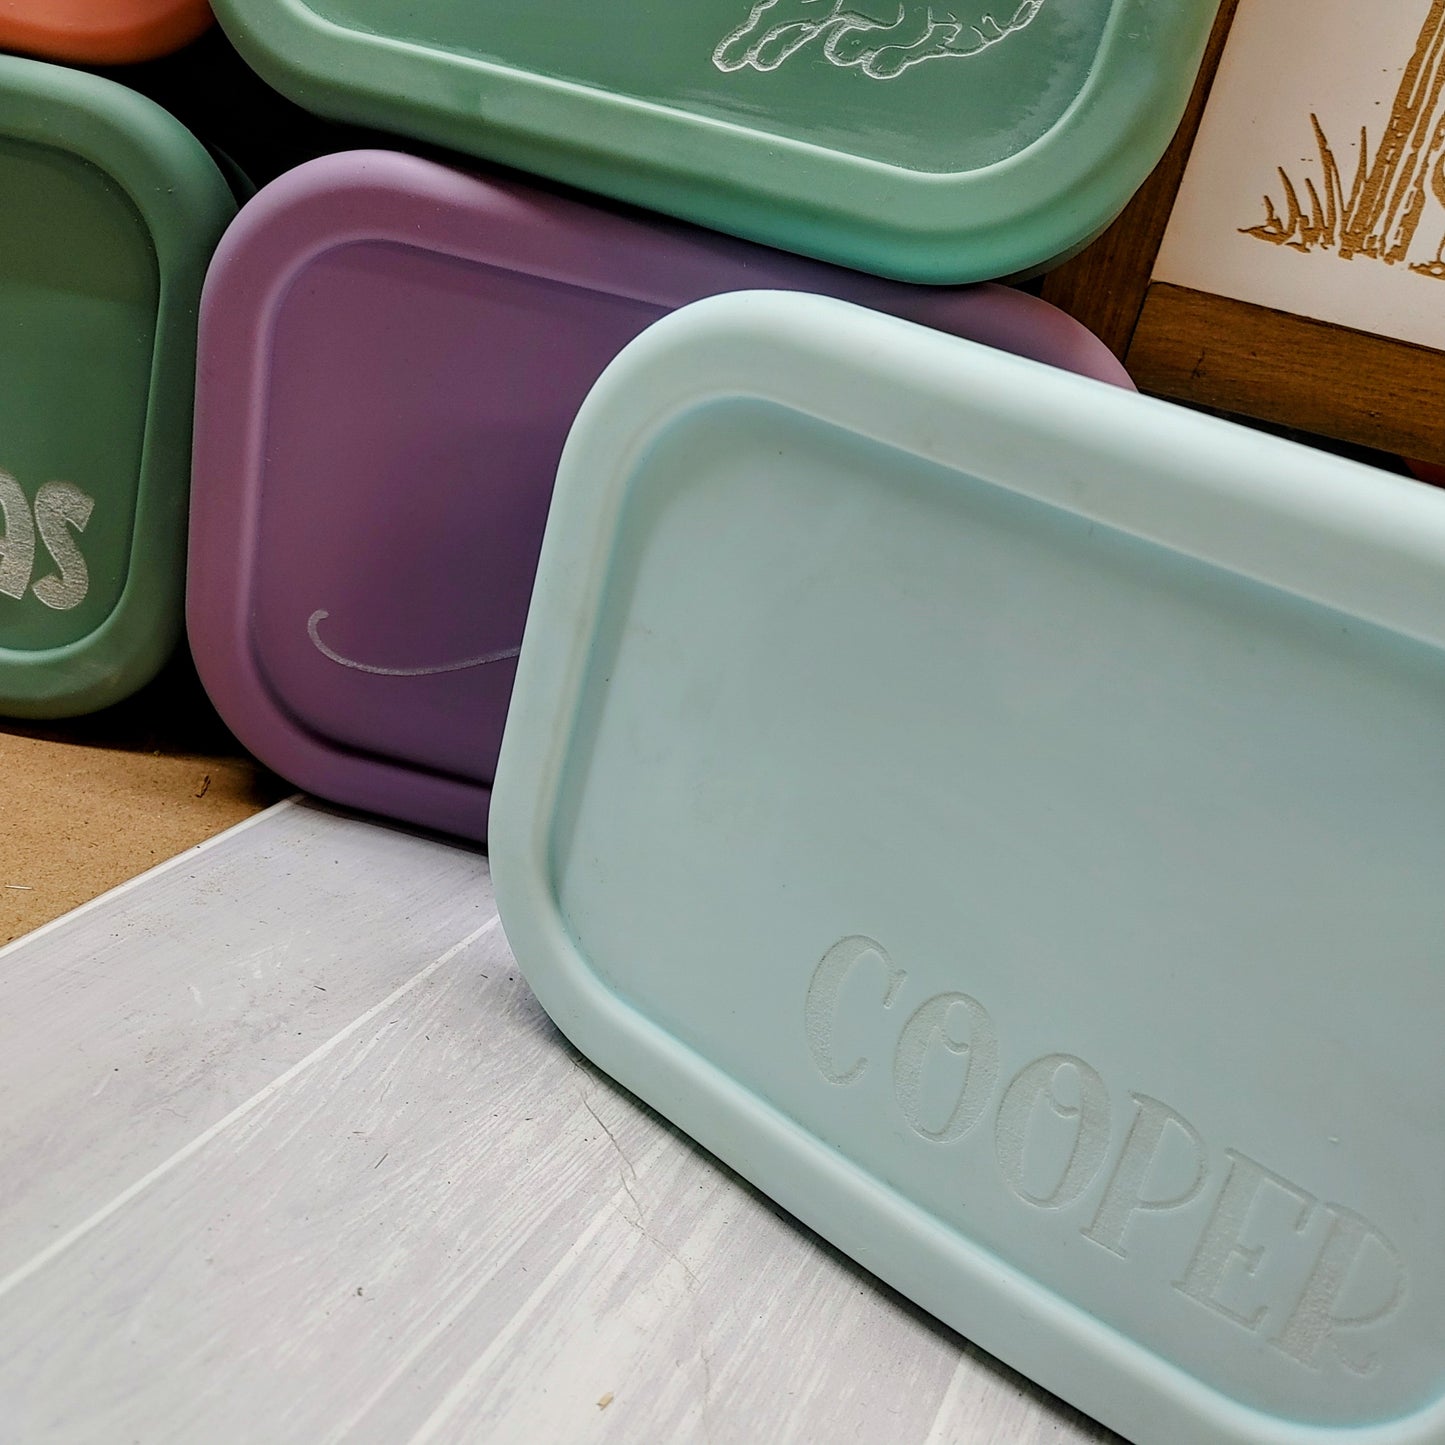 Custom Silicone Lunch Box with Personalization for Child, School